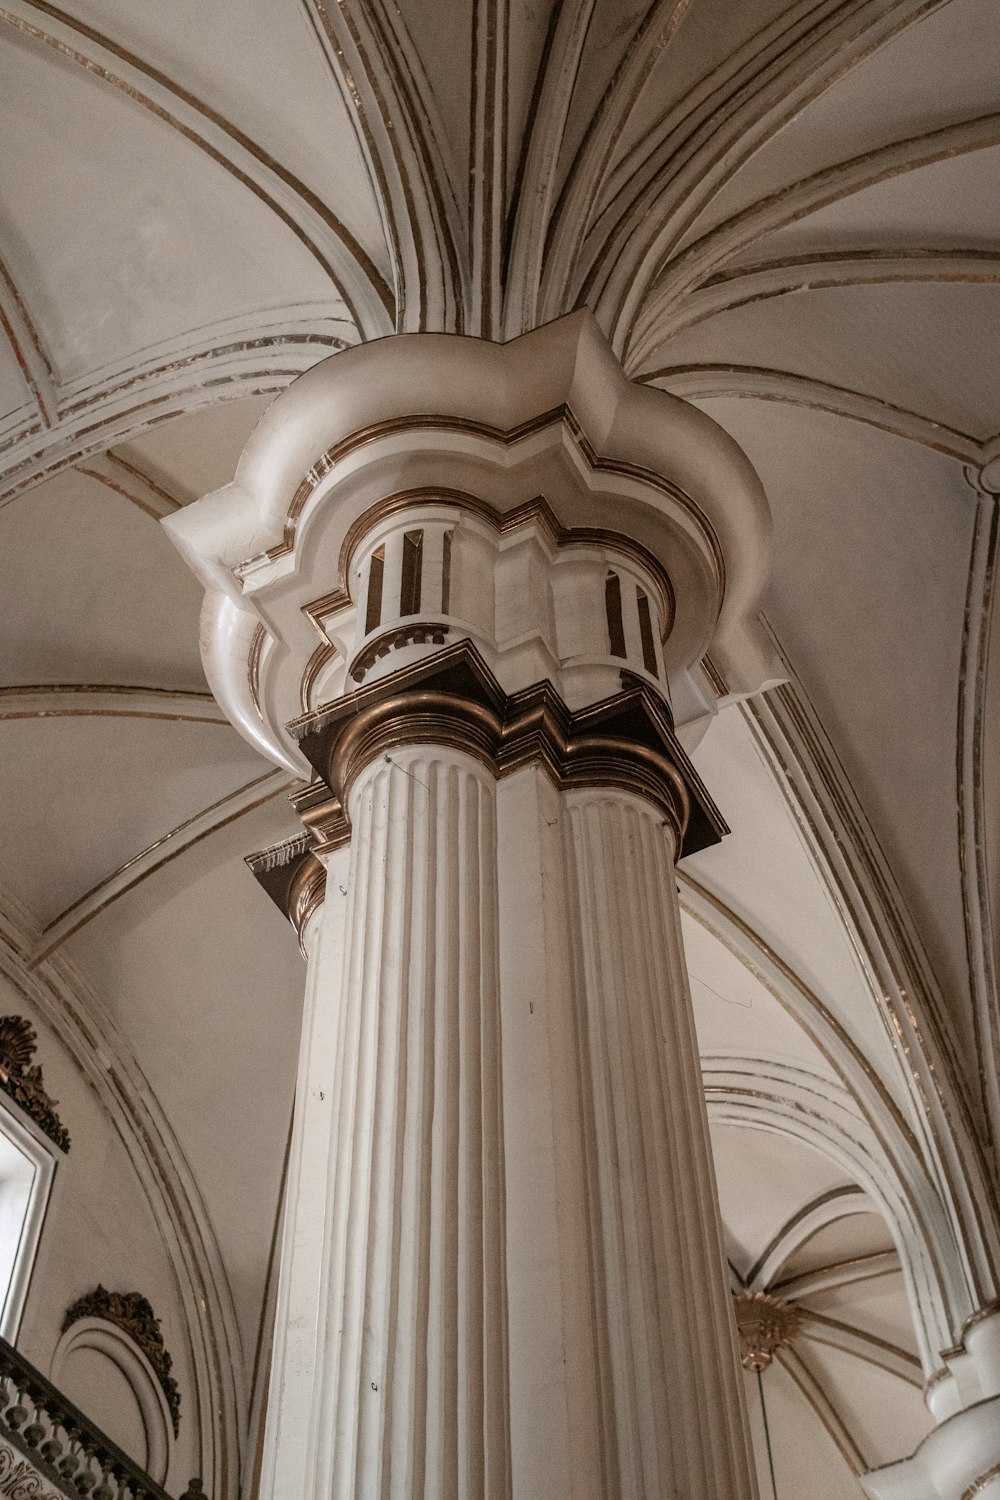 a column in a building with a clock on it